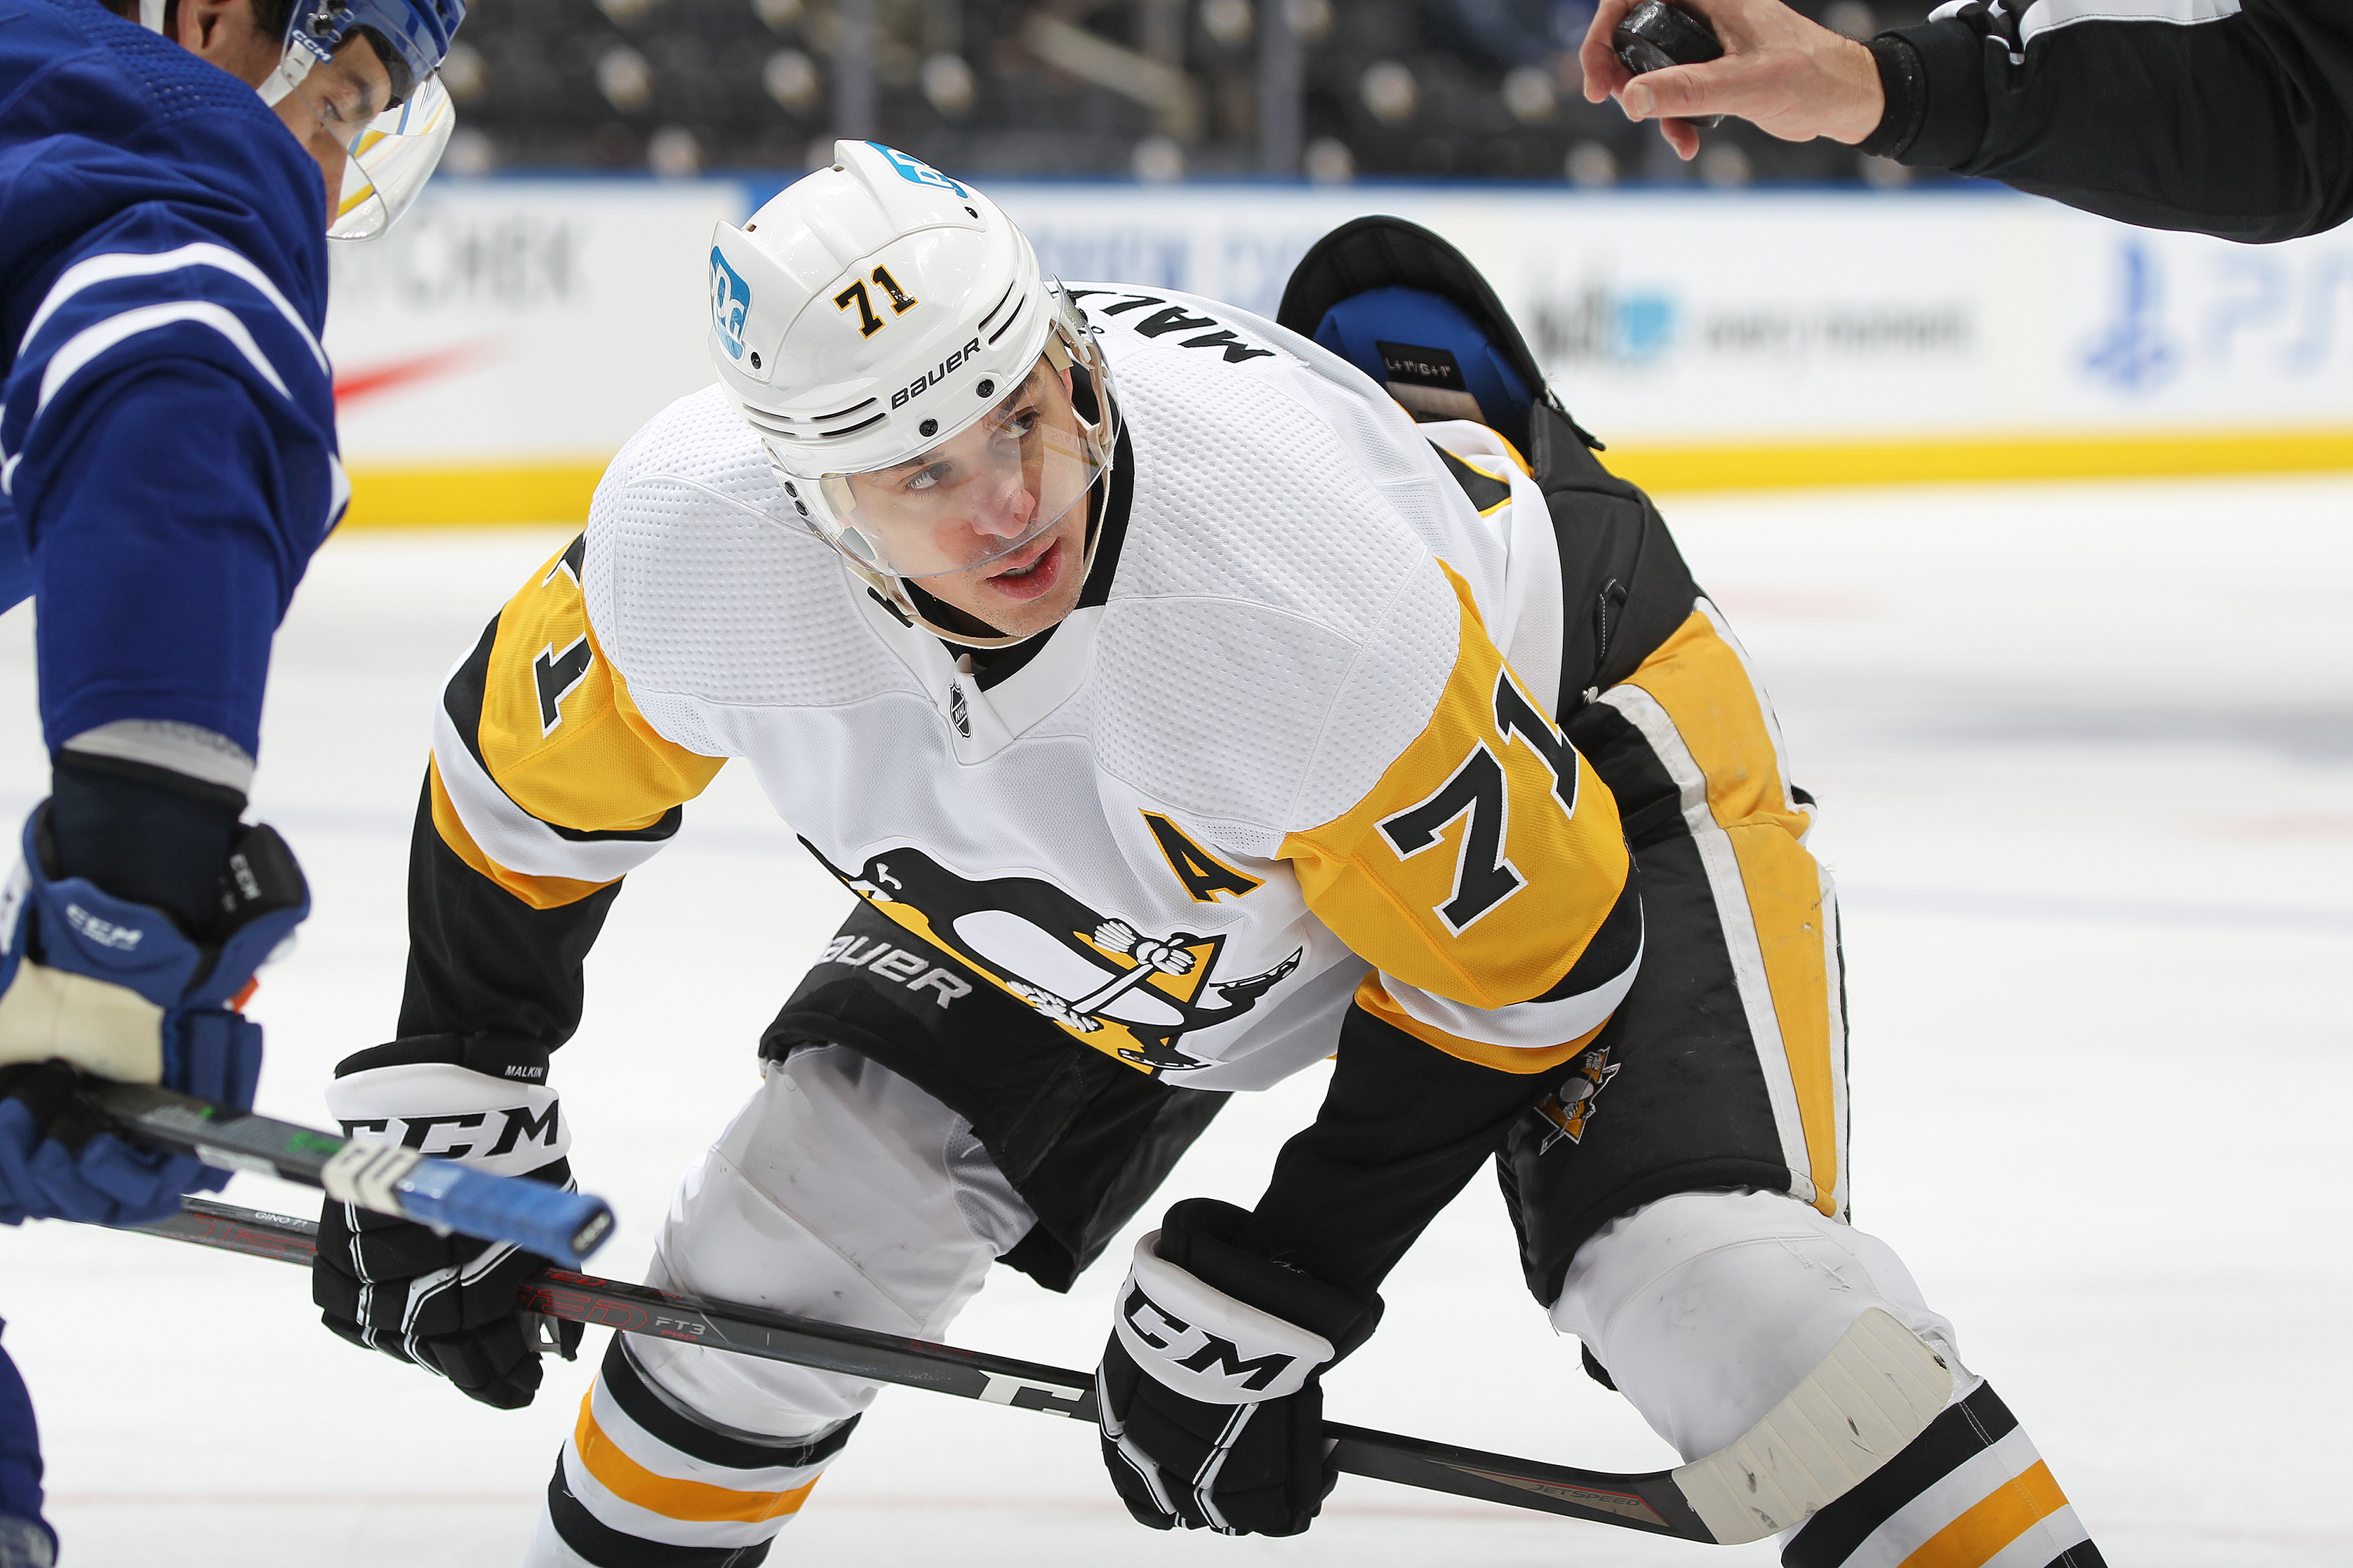 Penguins drop another Metropolitan Division game, fall to Devils